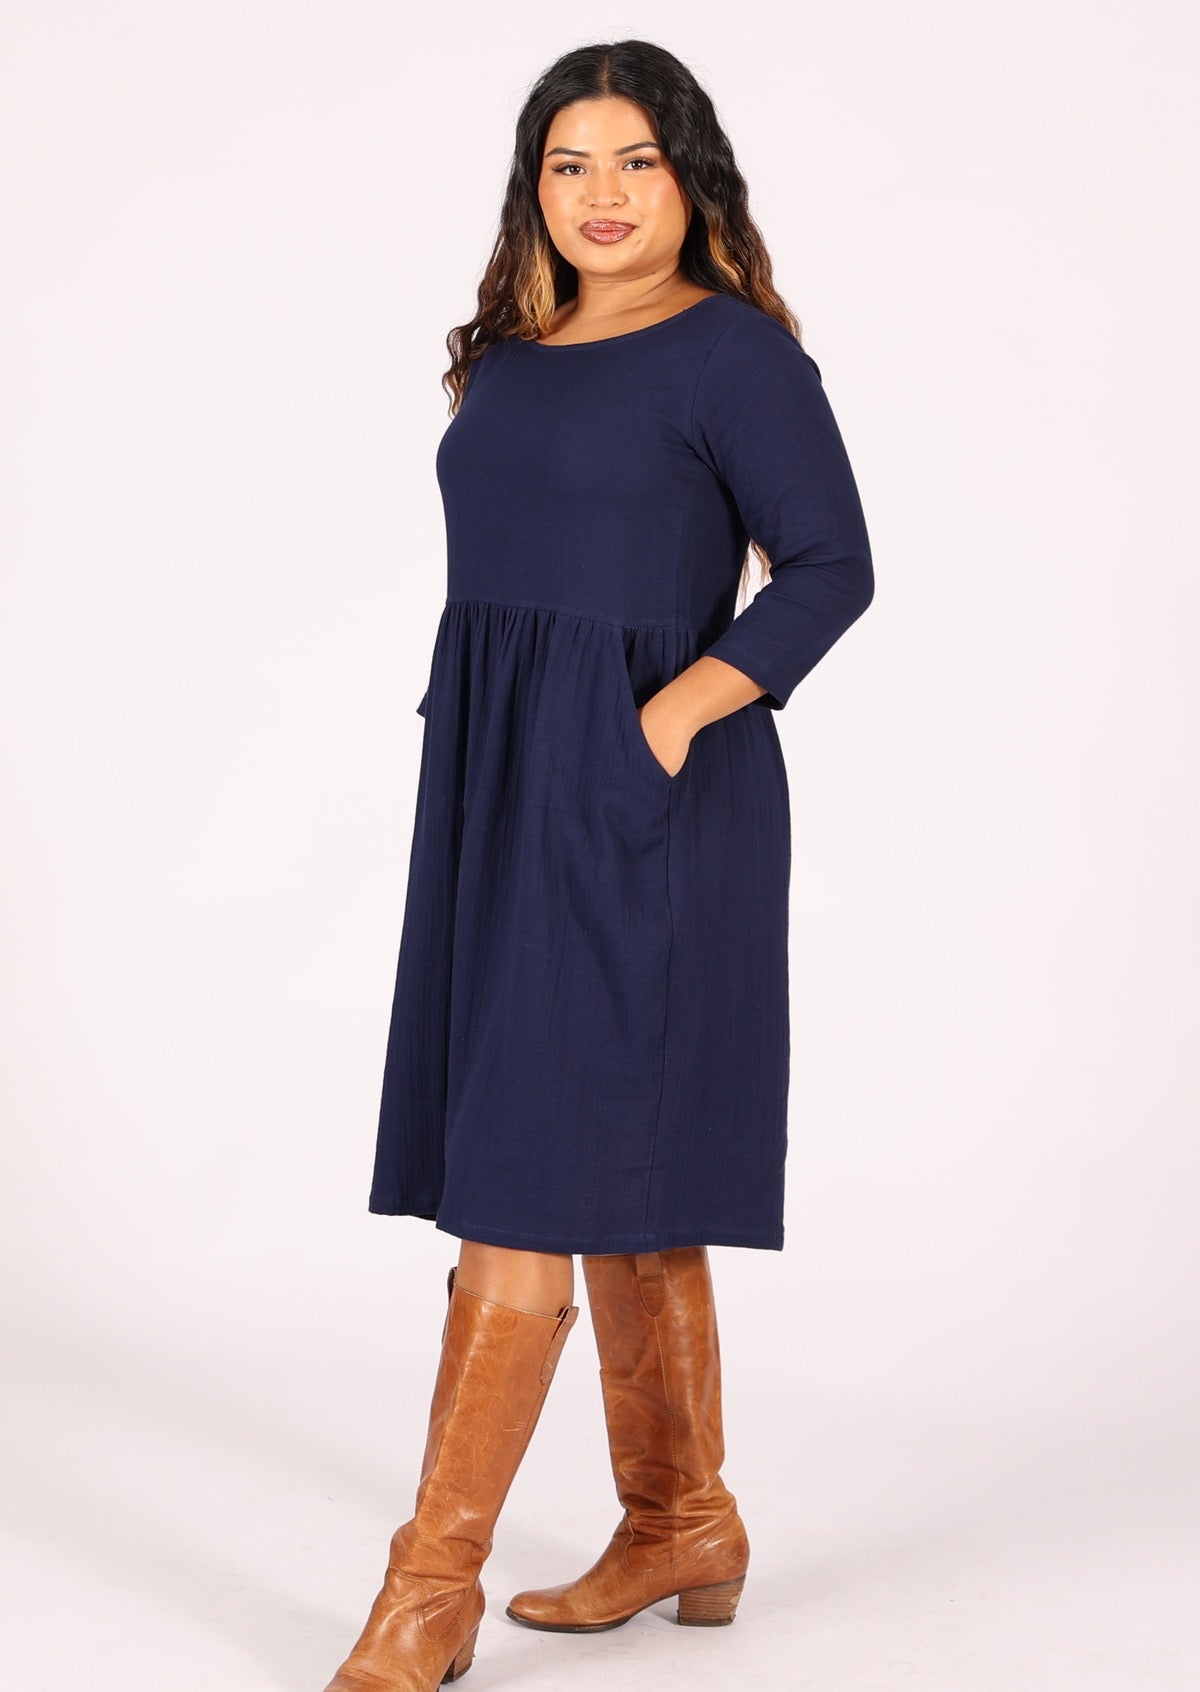 Double cotton dress with relaxed waistline and pockets